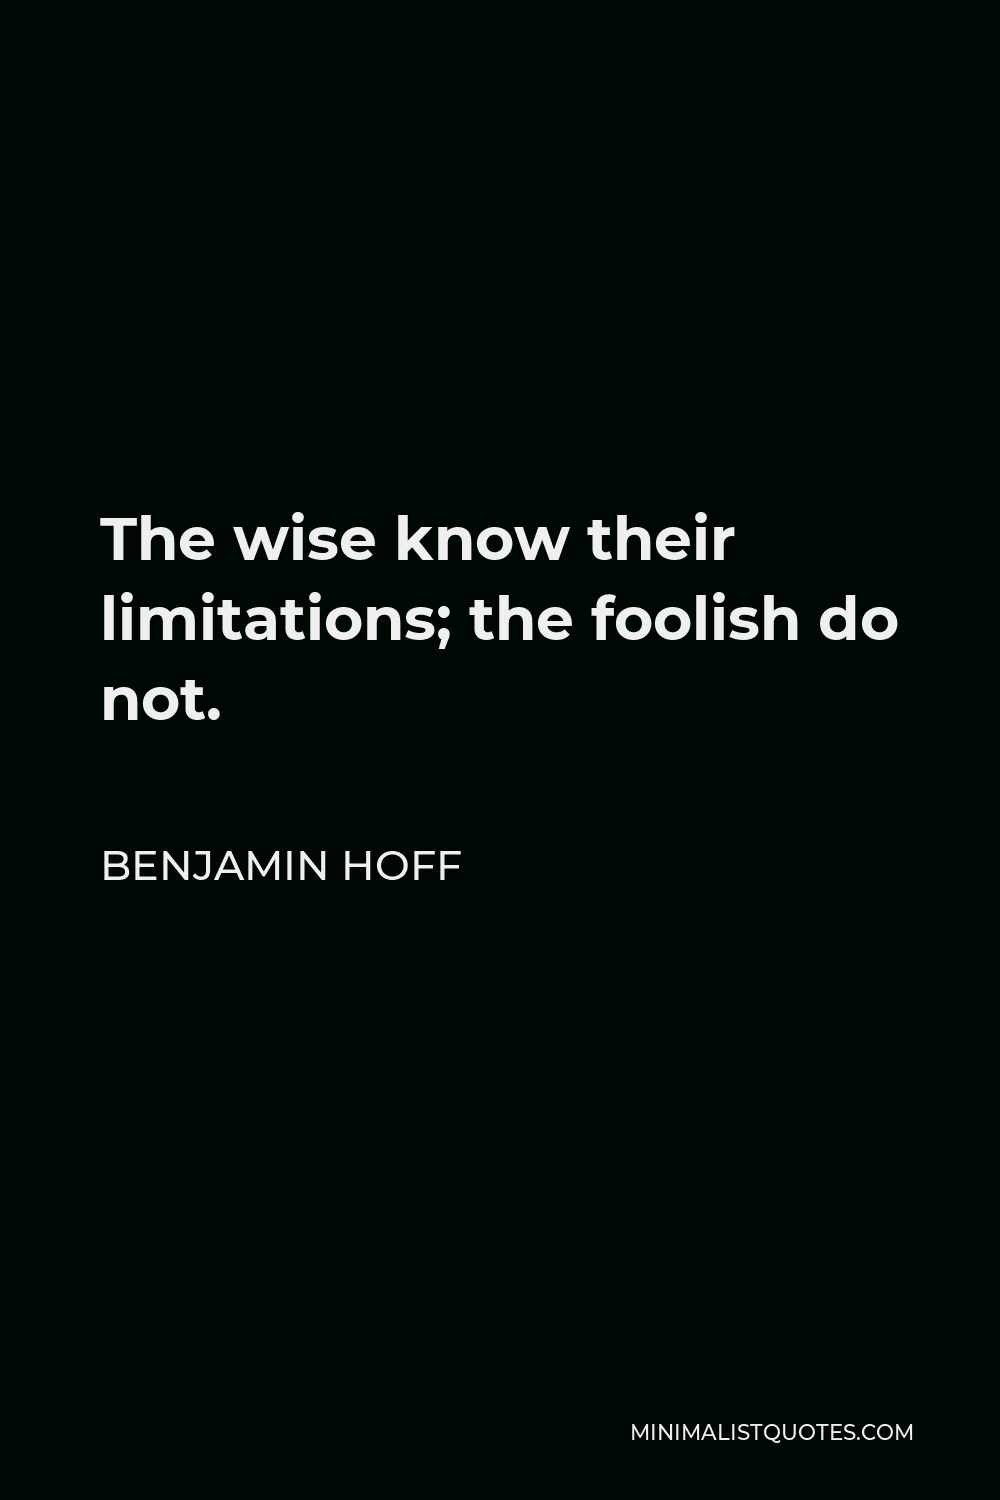 Benjamin Hoff Quote - The wise know their limitations; the foolish do not.